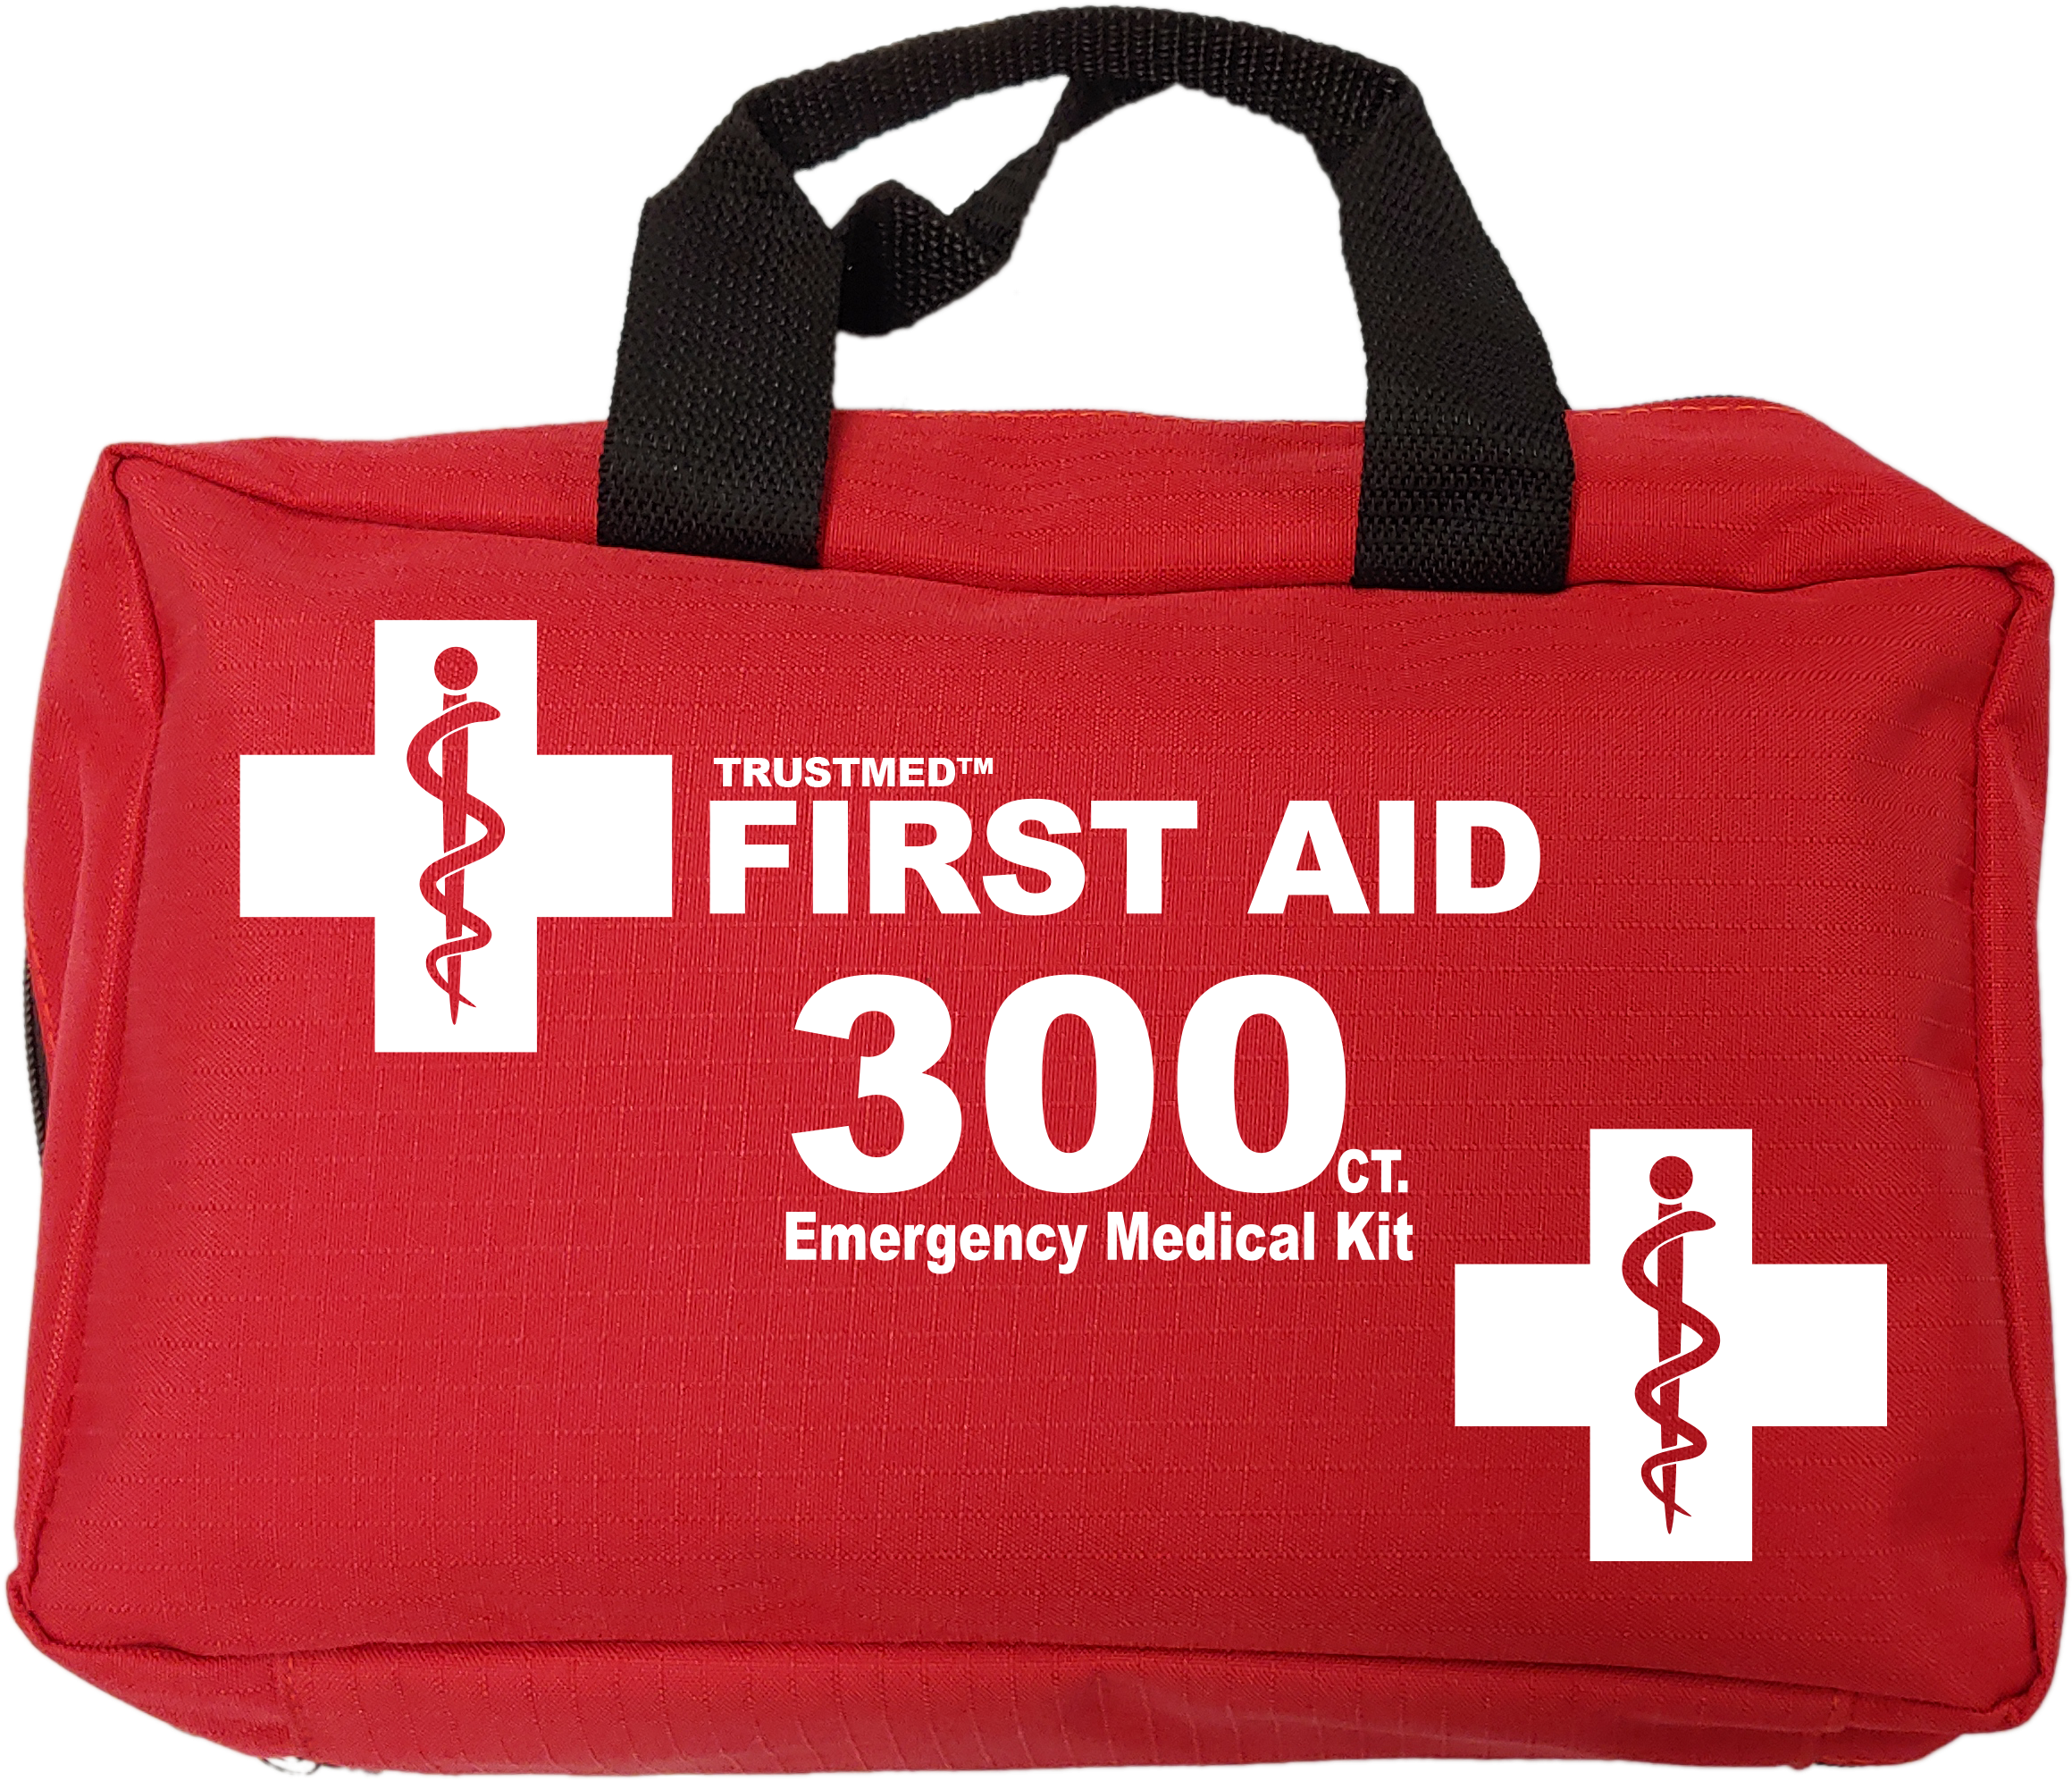 Image of First aid kit